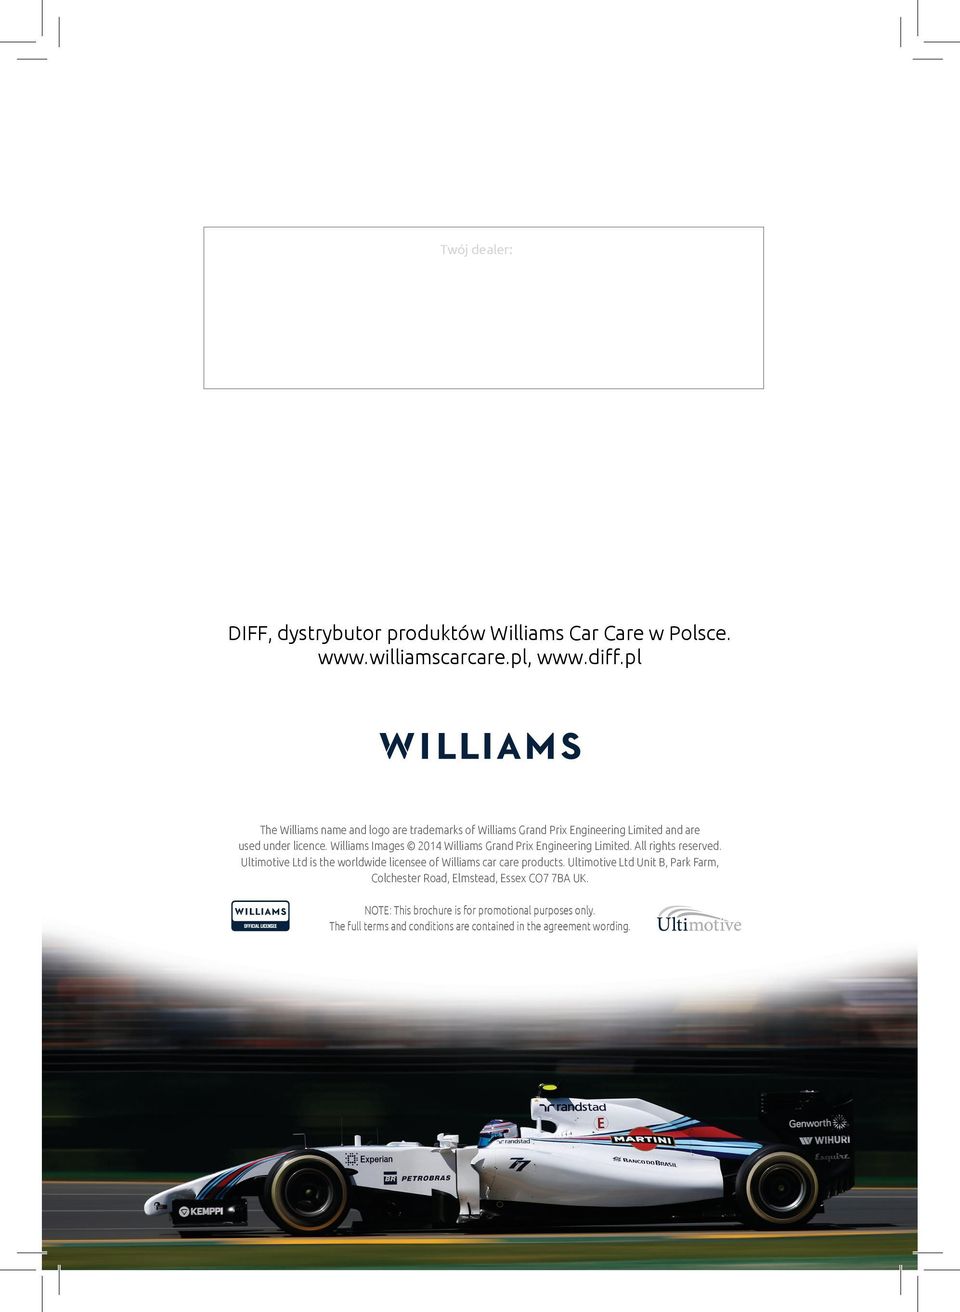 Williams Images 2014 Williams Grand Prix Engineering Limited. All rights reserved.